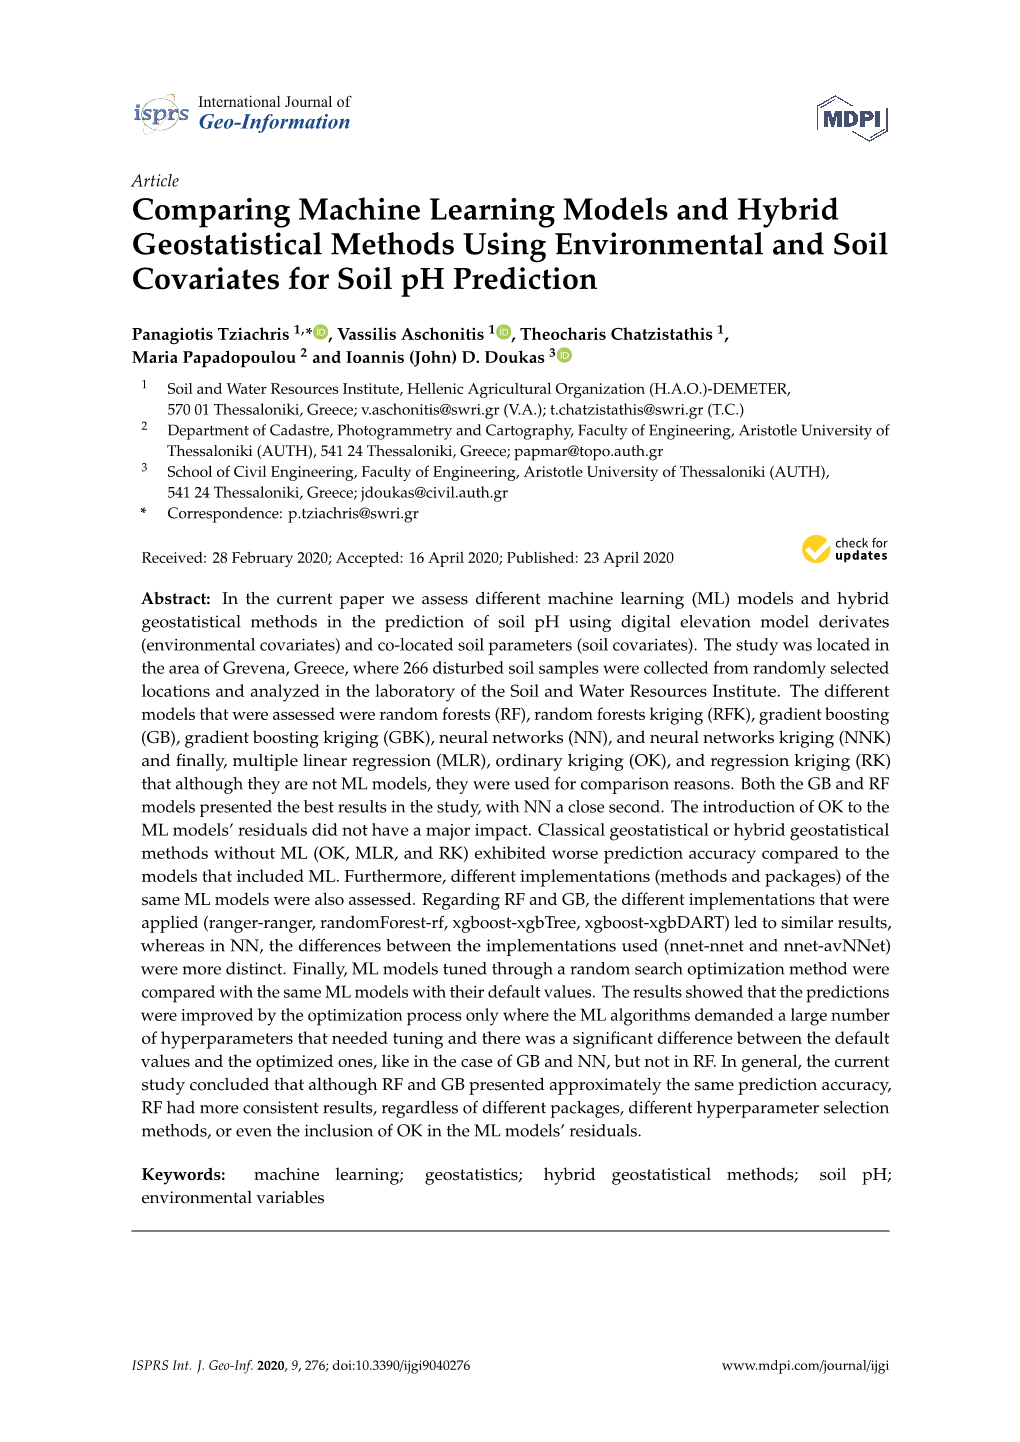 Comparing Machine Learning Models and Hybrid Geostatistical Methods Using Environmental and Soil Covariates for Soil Ph Prediction